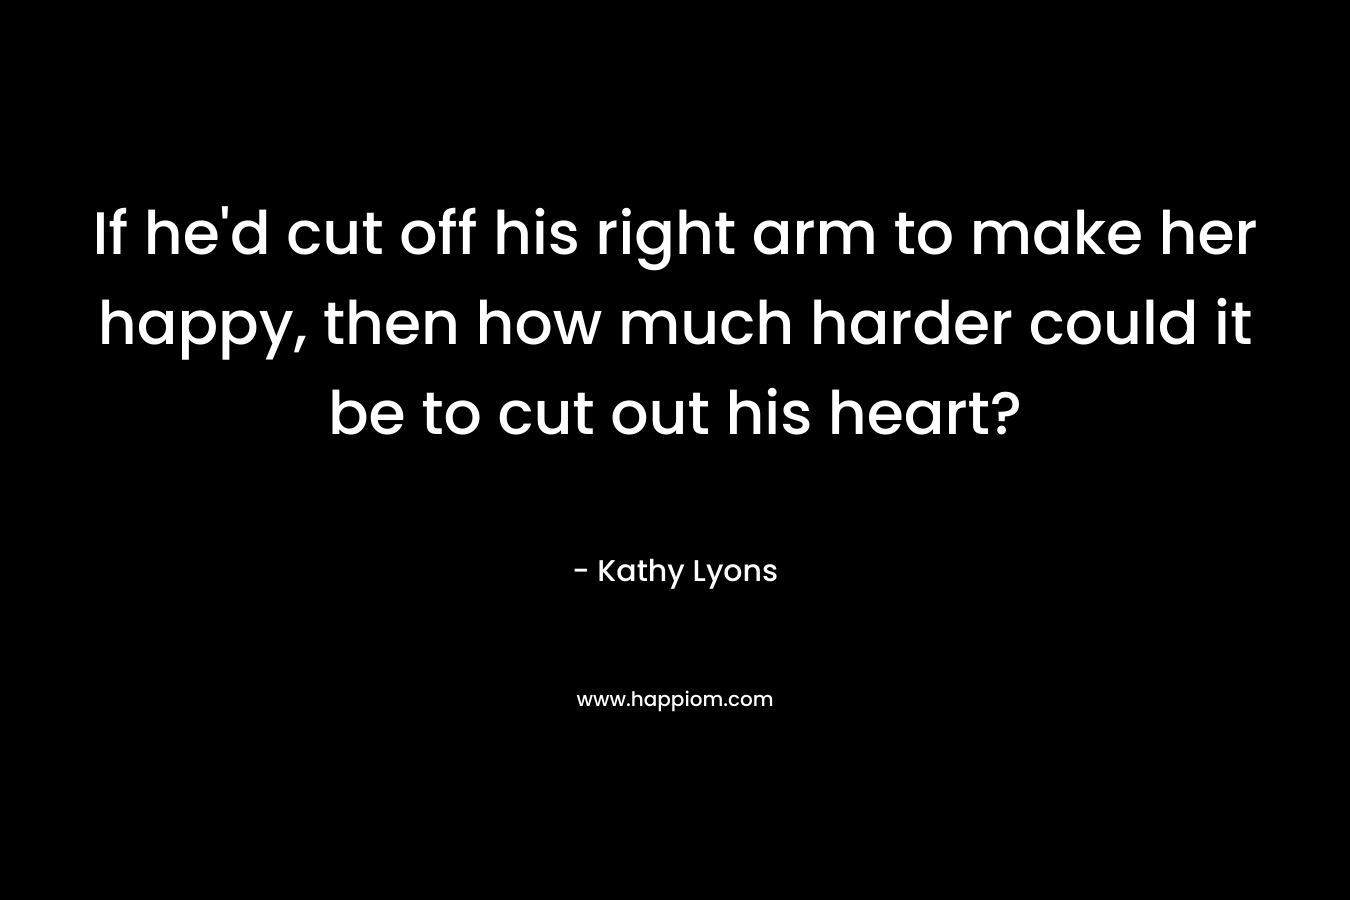 If he’d cut off his right arm to make her happy, then how much harder could it be to cut out his heart? – Kathy Lyons